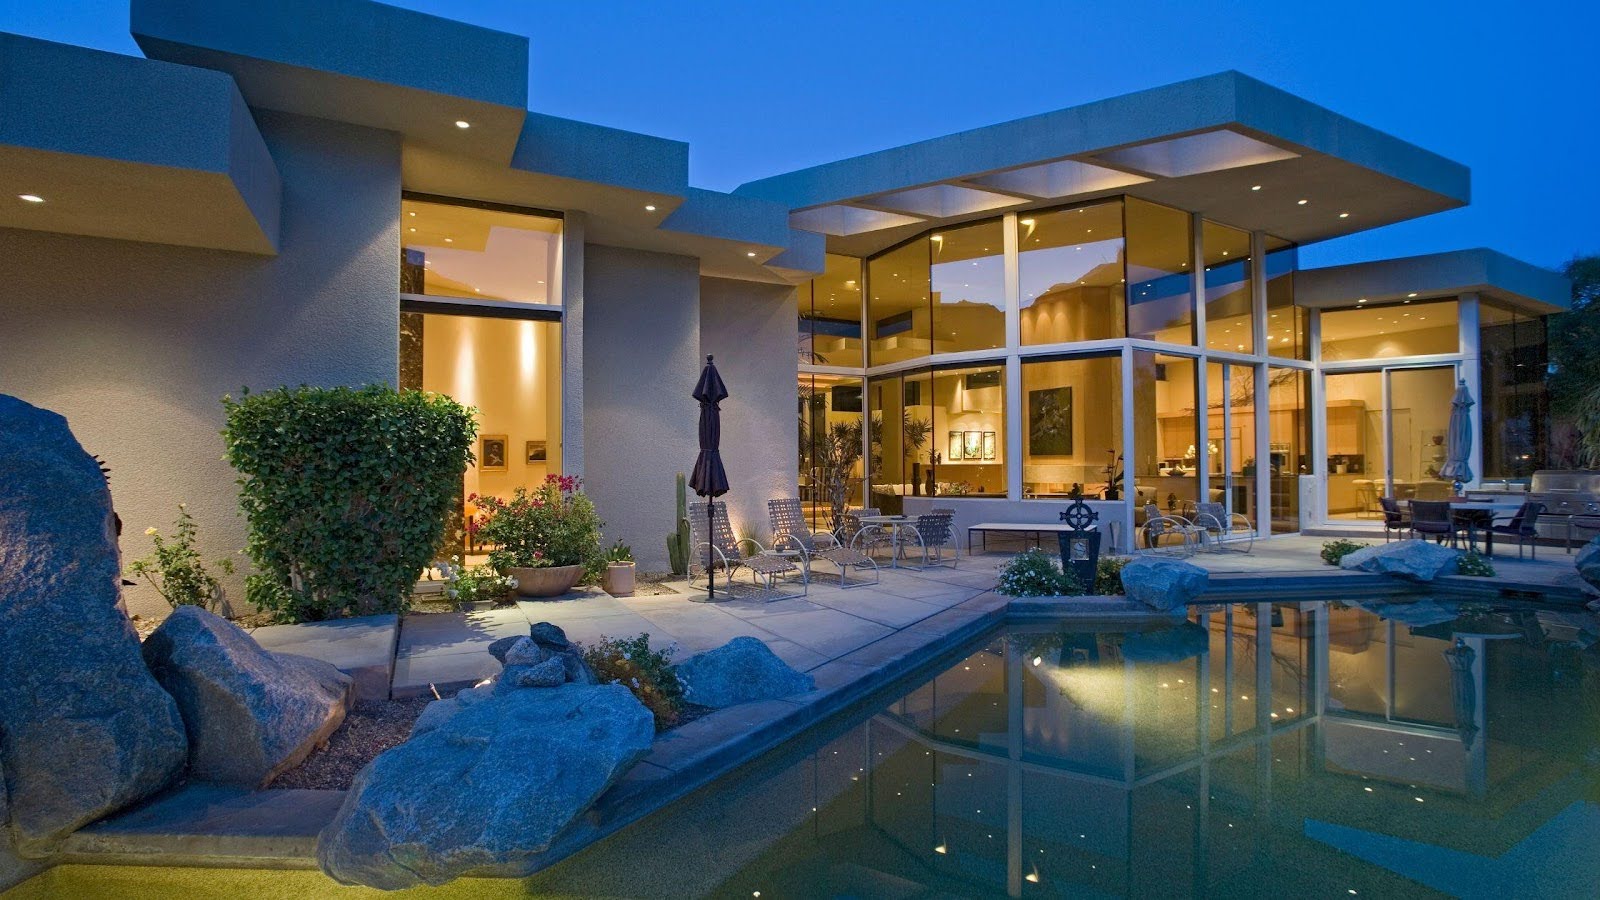 A luxurious modern home with expansive glass walls and sleek architectural lines, illuminated in the evening. 